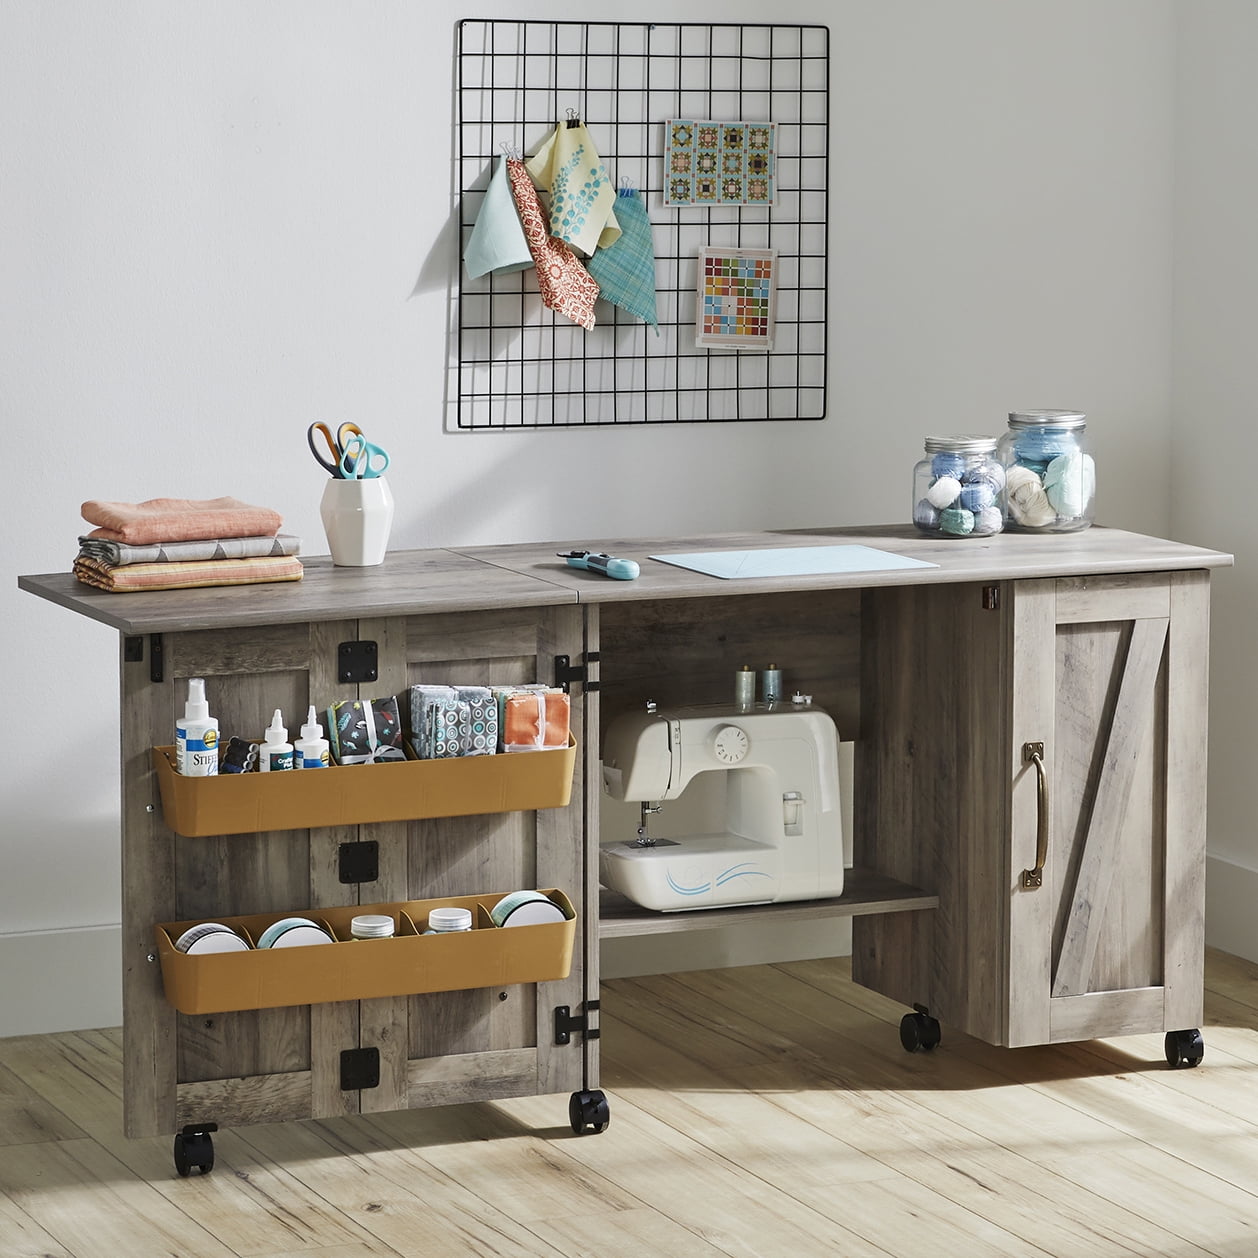 Wood Foldable Sewing Table With Multiple Storage Bins